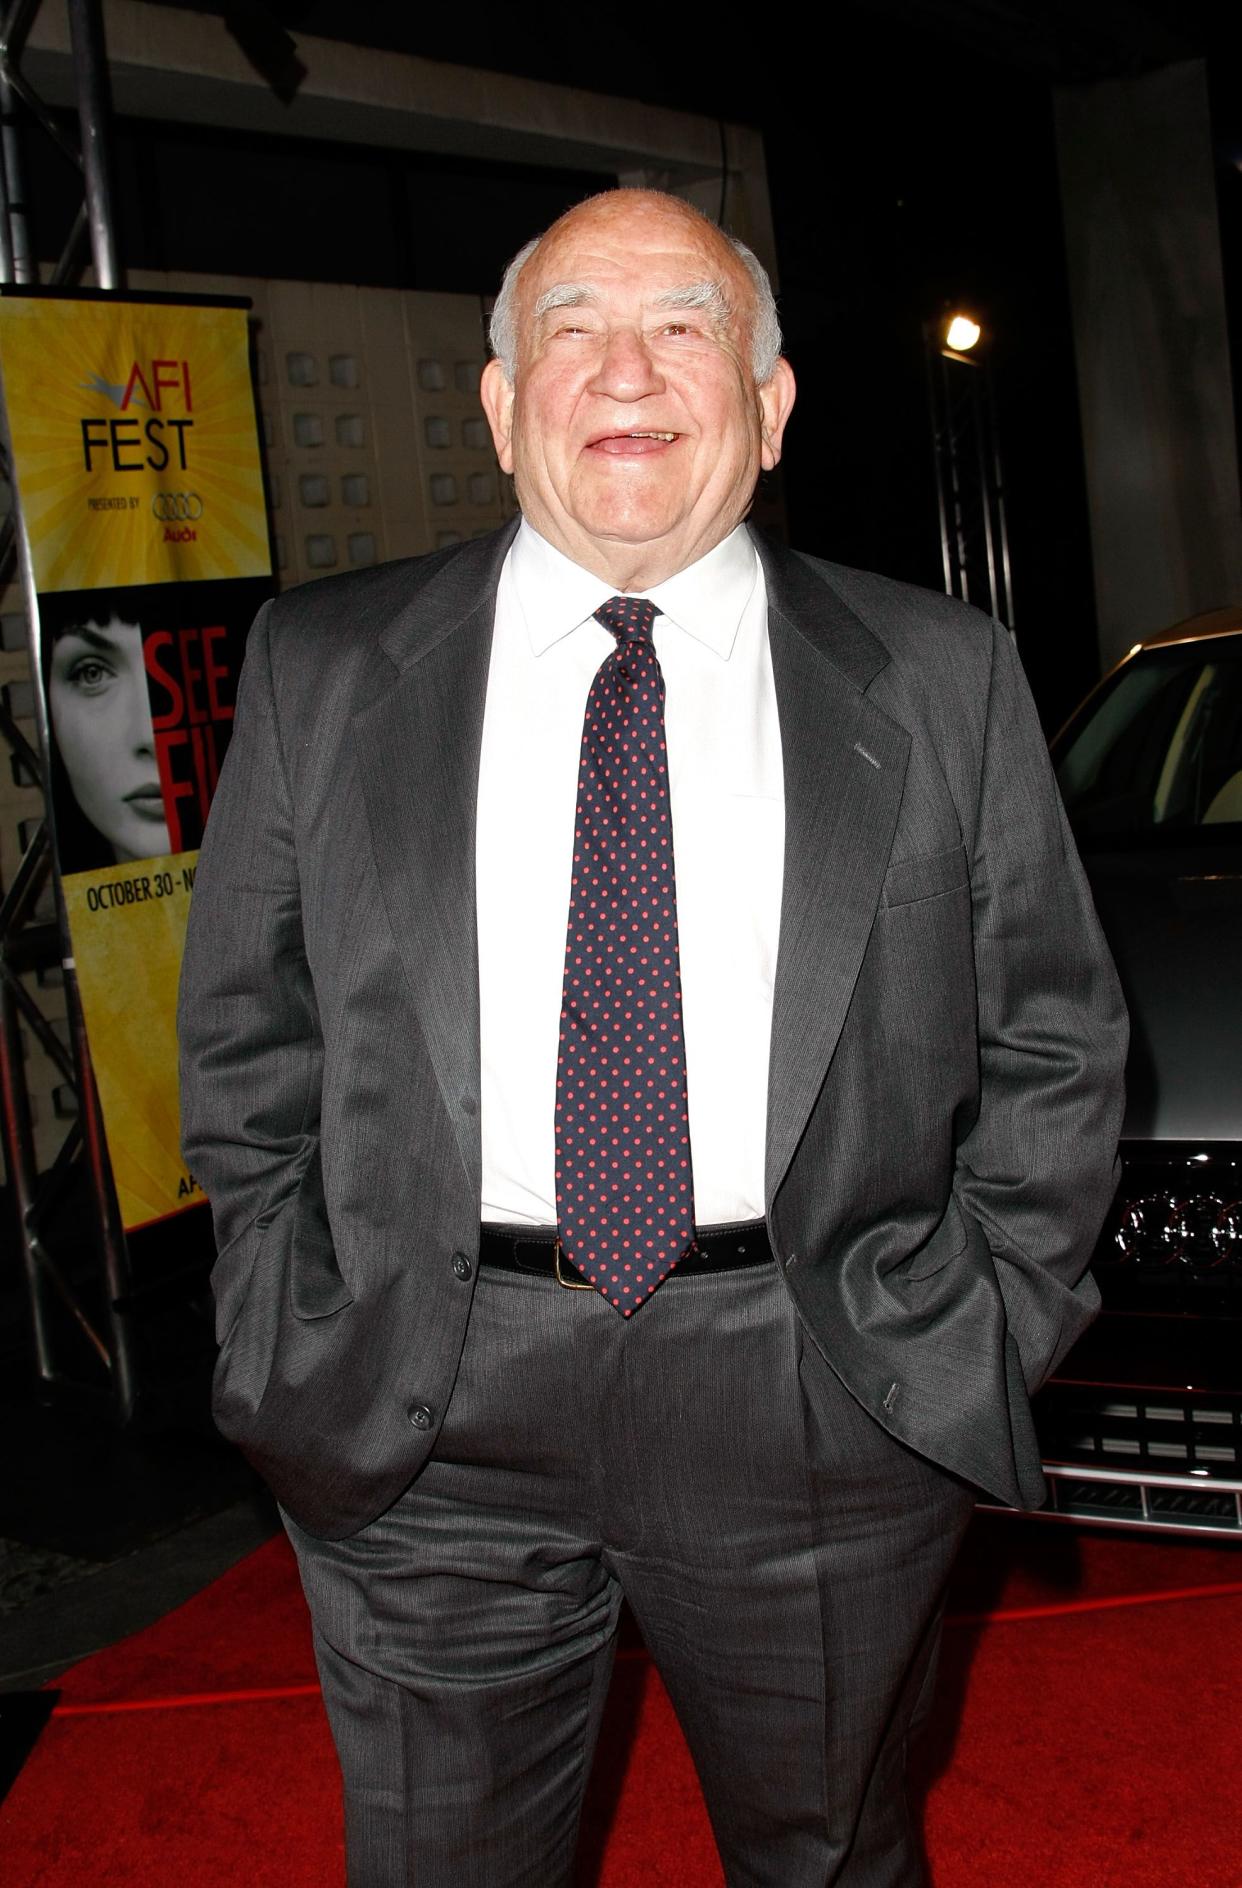 Legendary actor Ed Asner, who played Lou Grant on the "Mary Tyler Moore Show," died on Sunday, Aug. 29, 2021, surrounded by loved ones. He was 91.